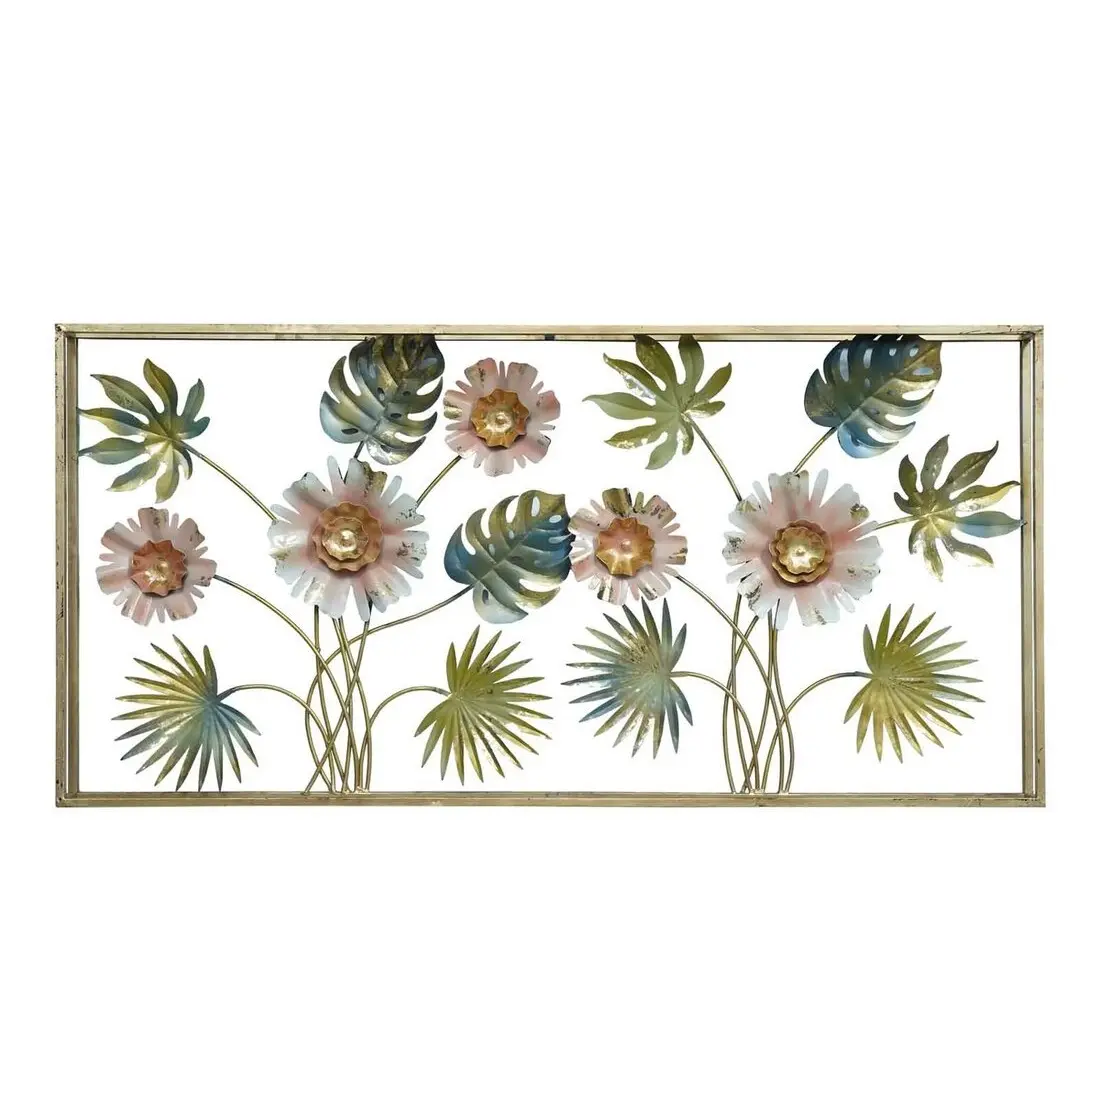 Retro Wrought Iron Leaf and Flowers Art Handicraft Display Wall Hanging Vintage Rectangle Painting Metal Flower Alloy Wall Art